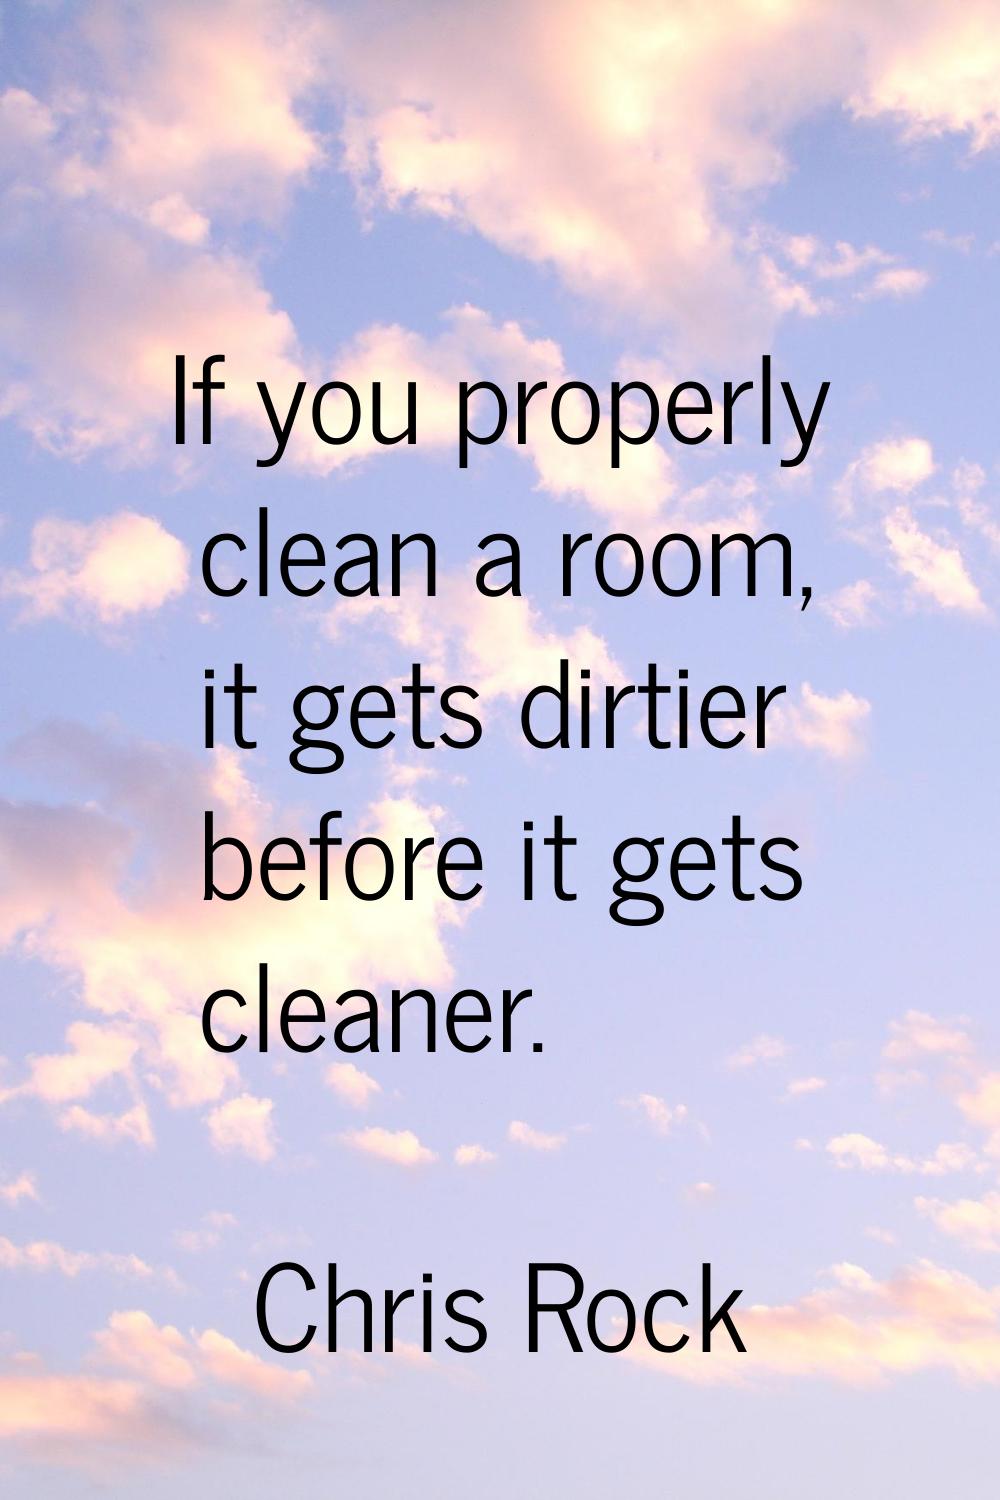 If you properly clean a room, it gets dirtier before it gets cleaner.